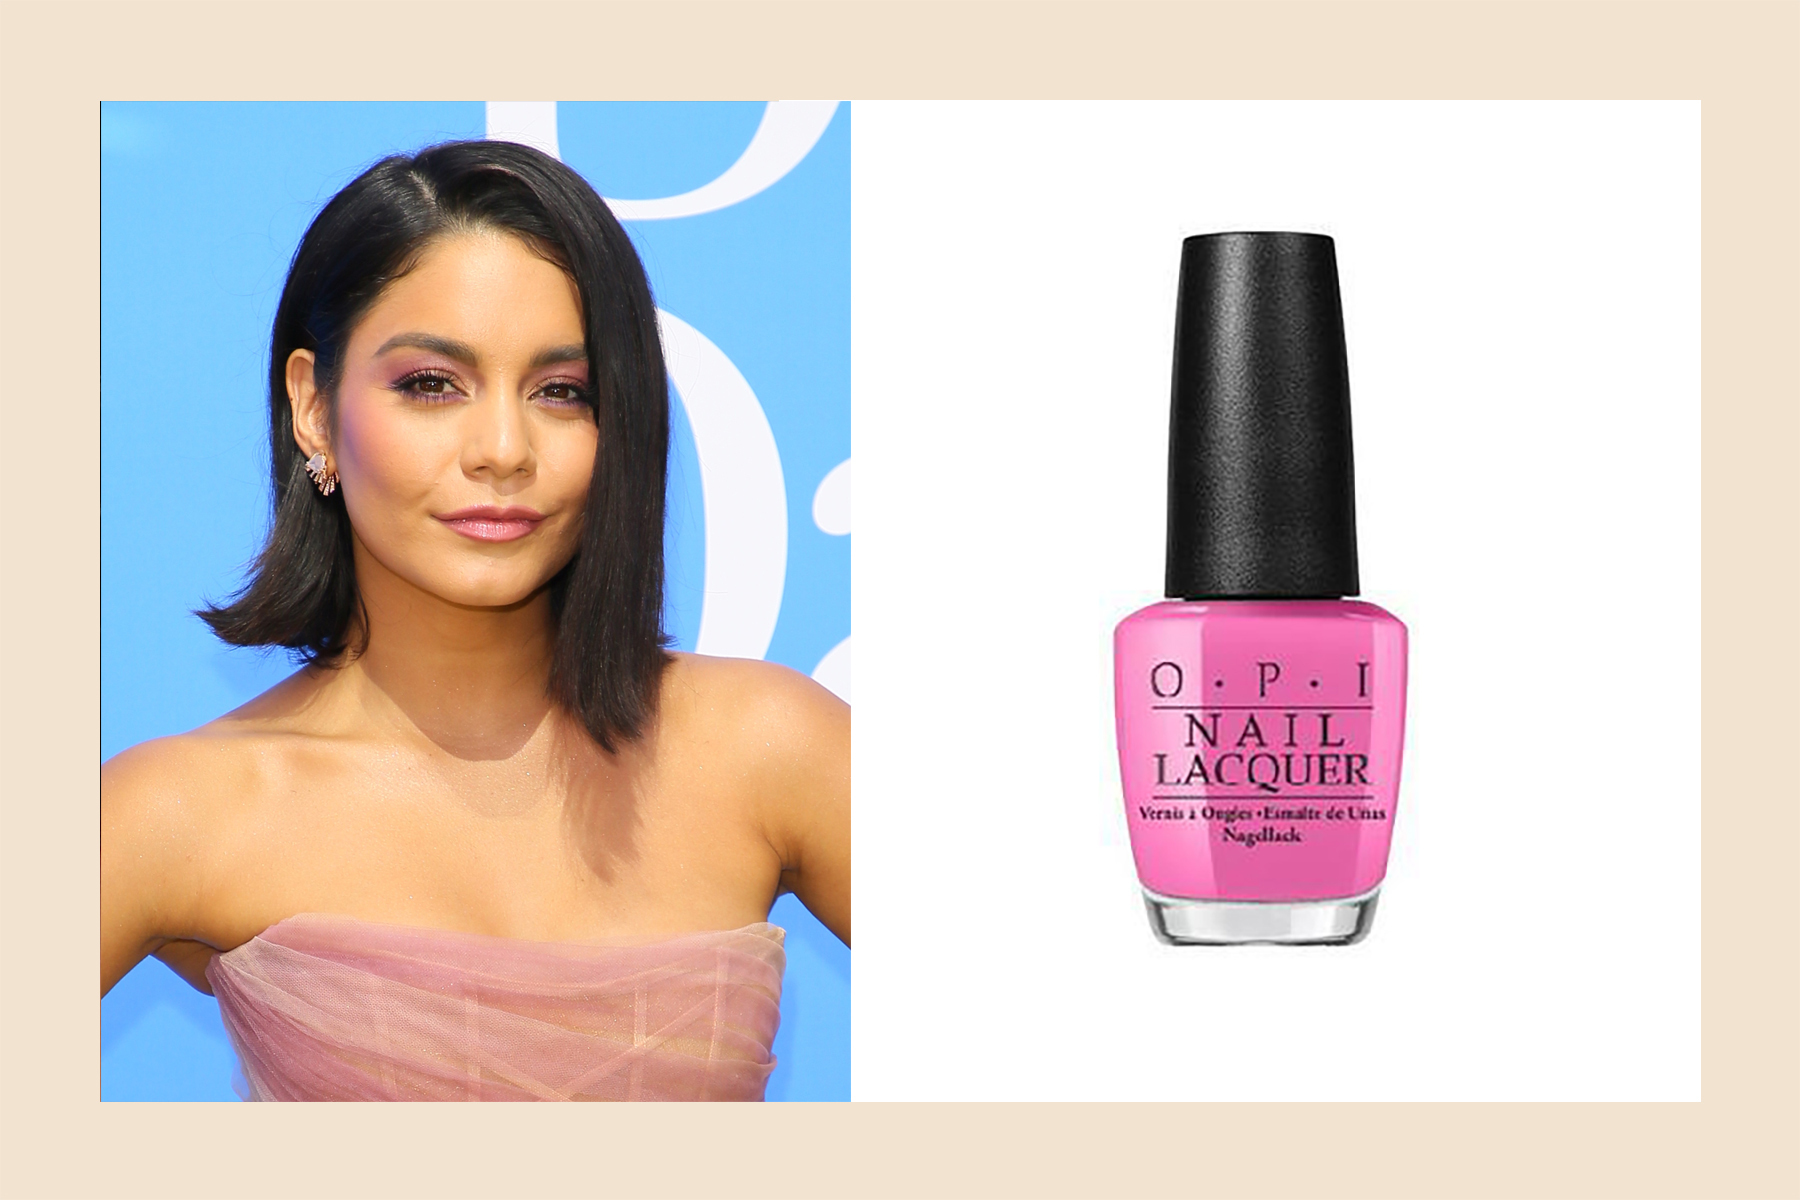 The Best Pink Nail Polish For Every Skin ToneHelloGiggles